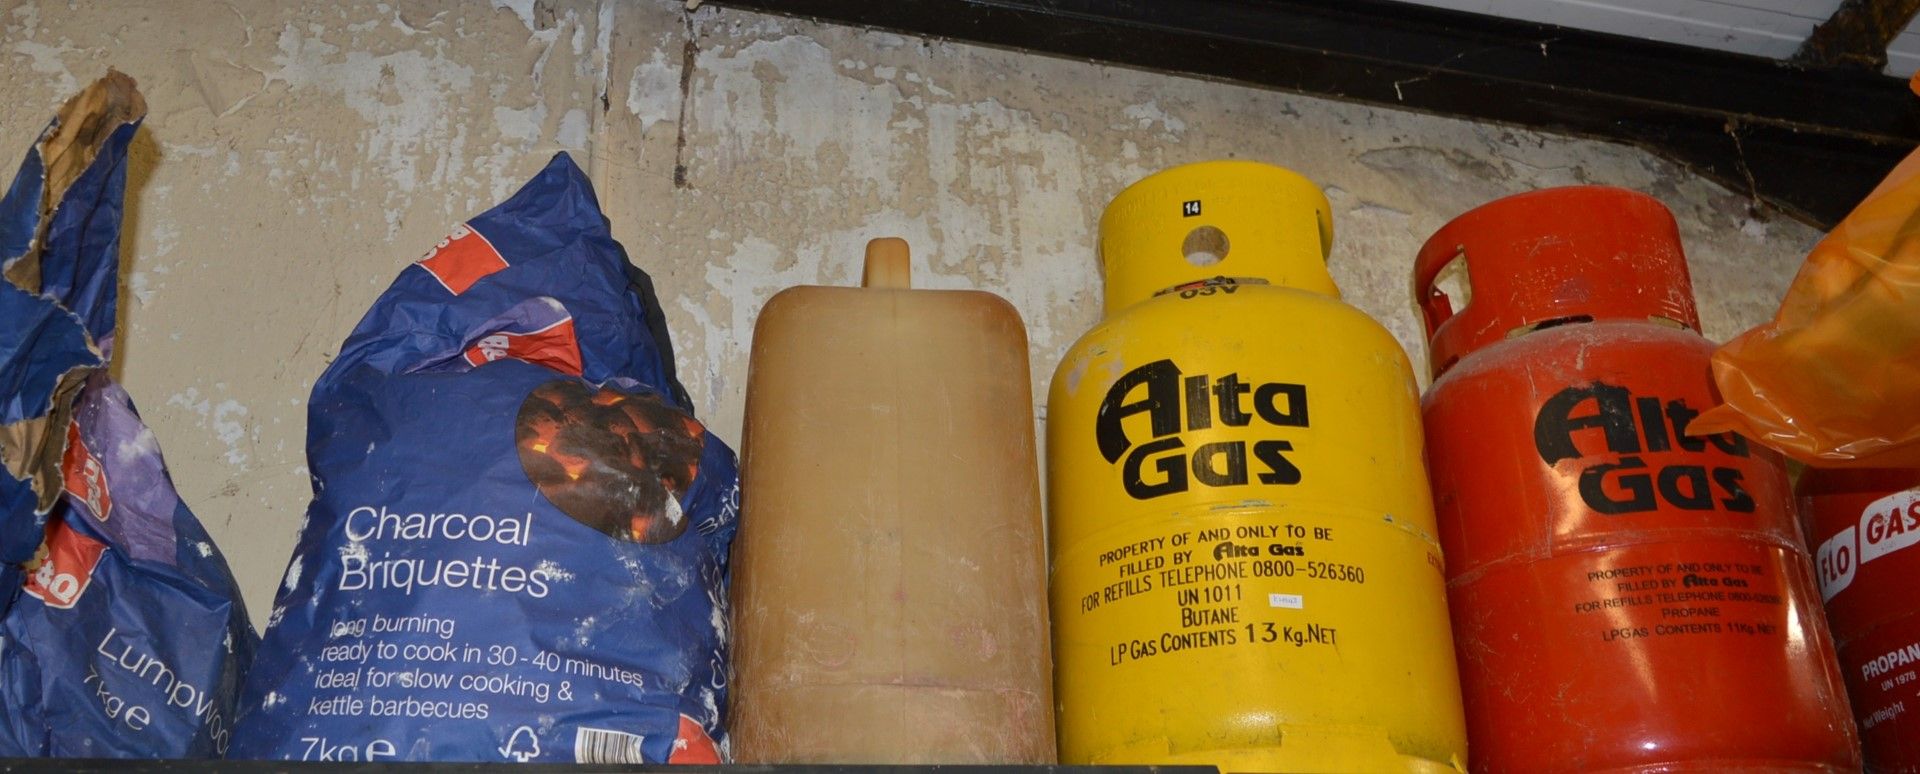 Assorted Lot - Includes 2 Sacks of Coal and 3 Gas Bottles - Ref: KH043 / SHD - CL168 - Location: